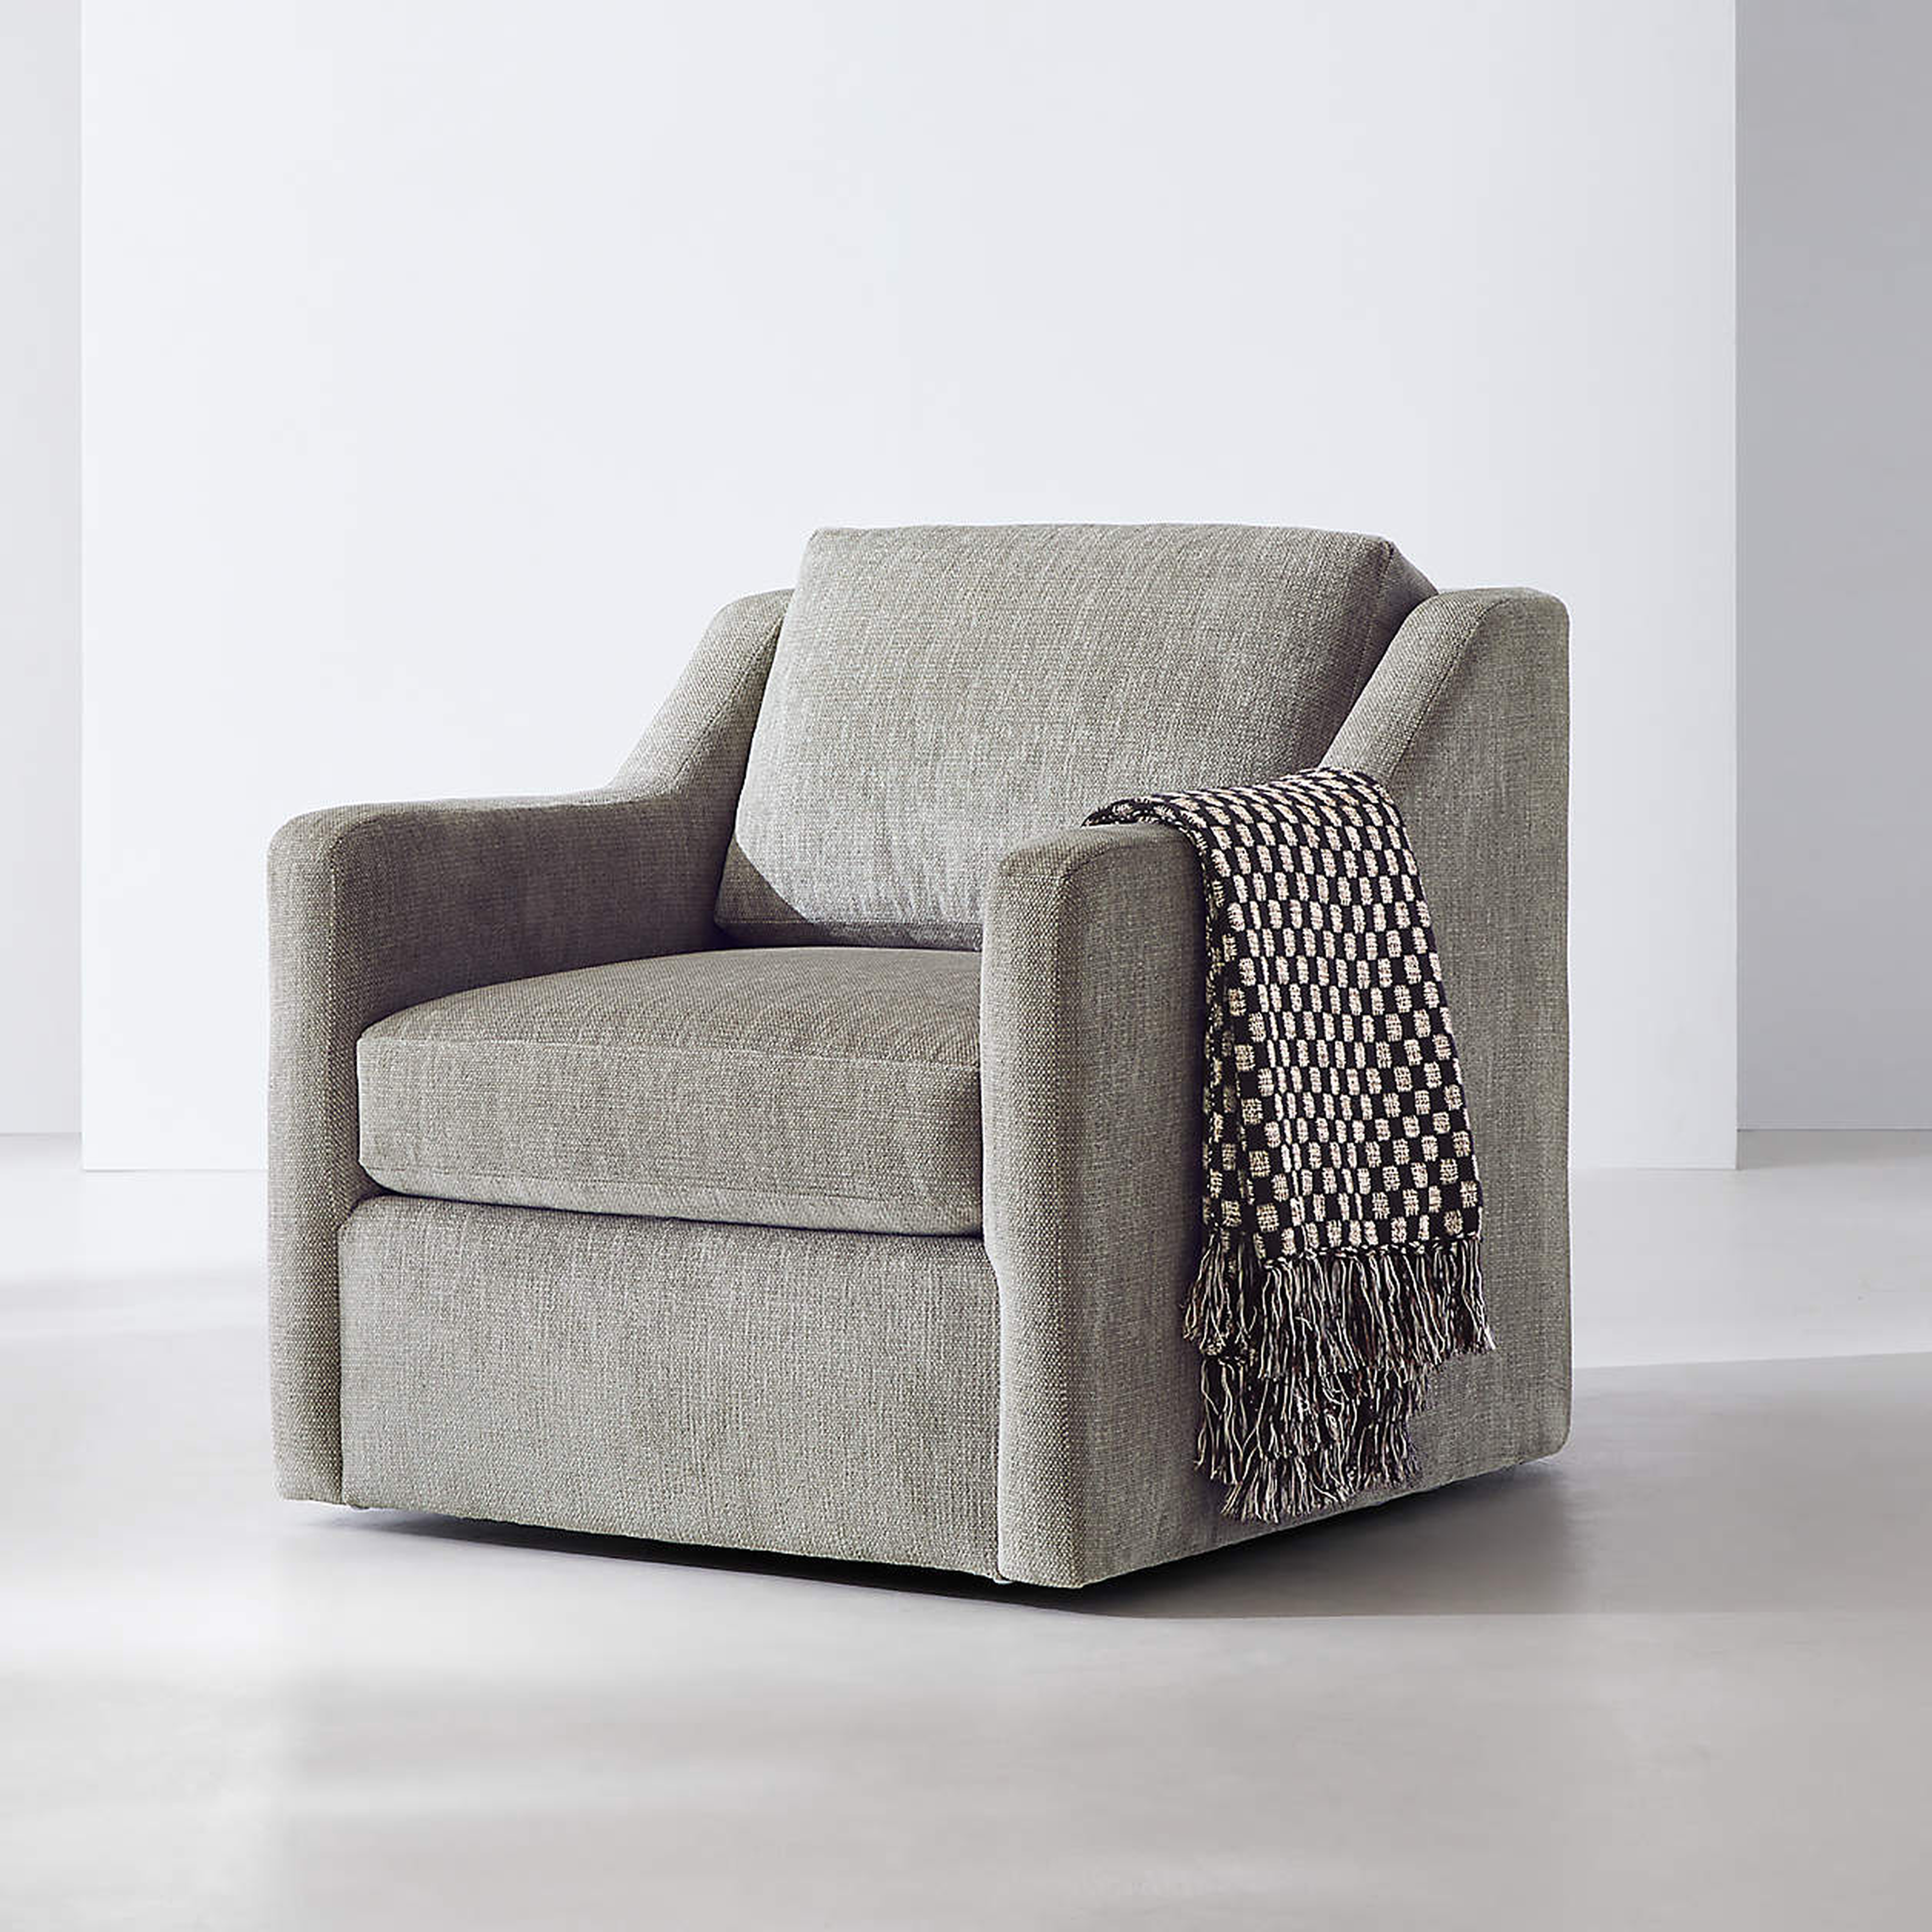 Notch Accent Chair - Crate and Barrel